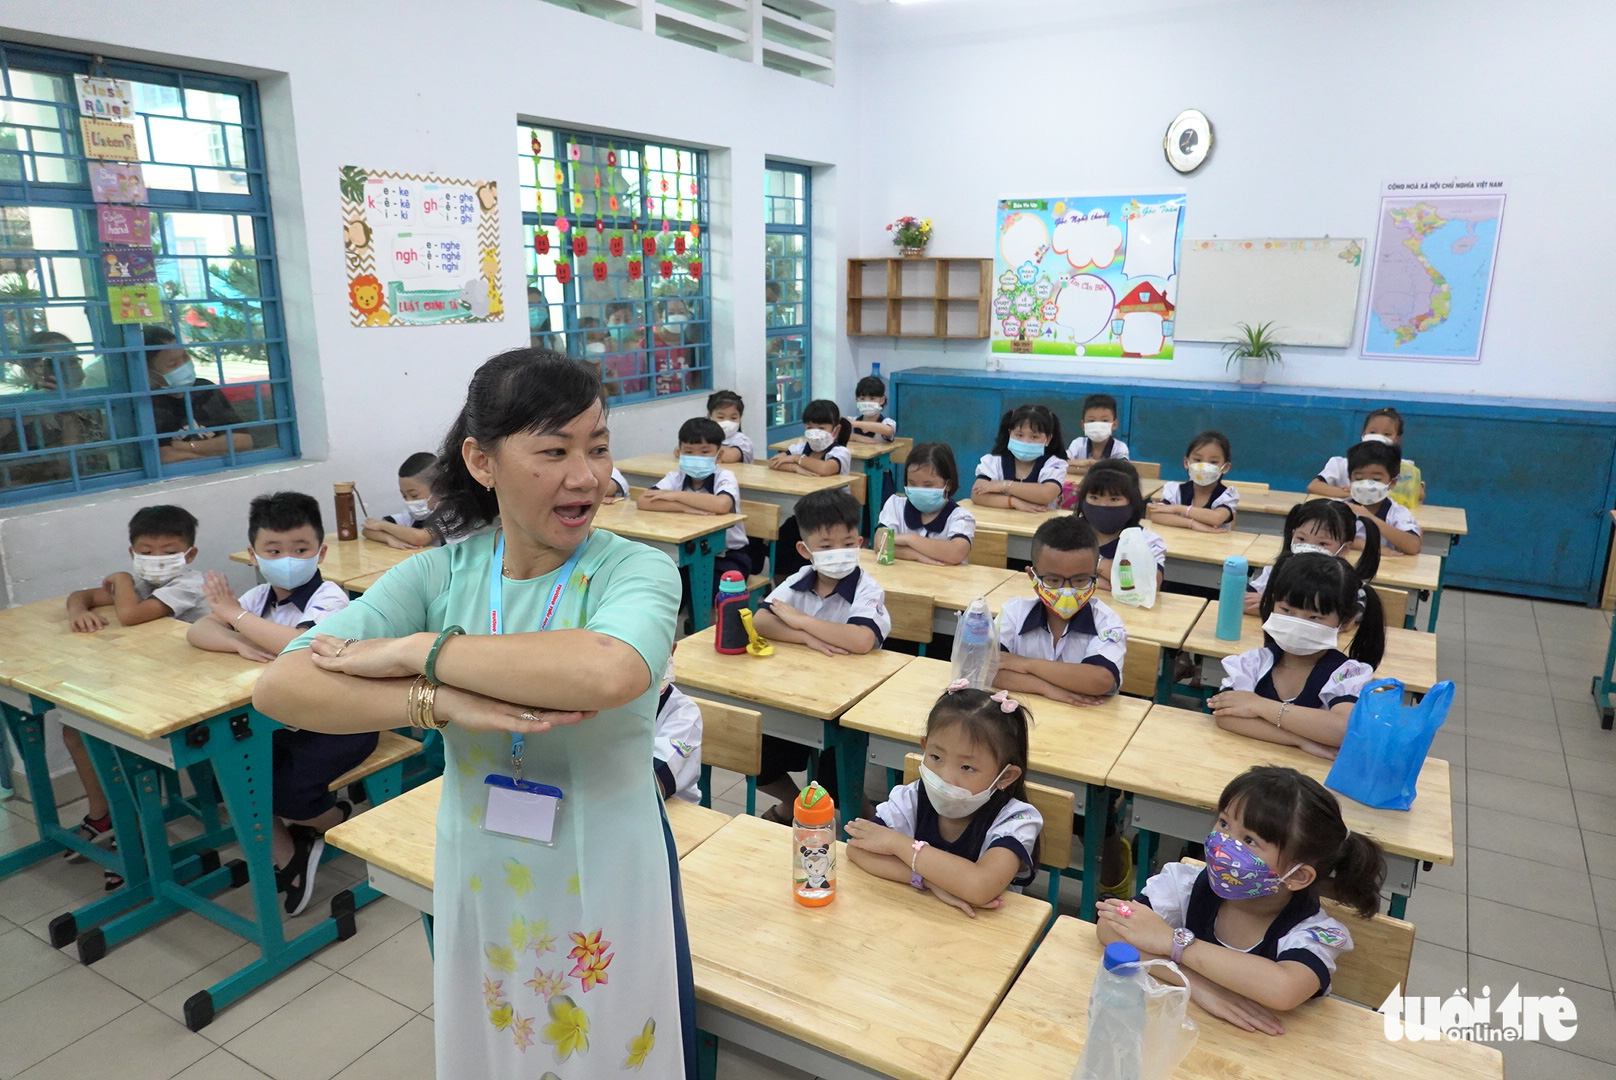 A teacher instructs her students on school regulations at an elementary school in Ho Chi Minh City, August 22, 2022. Photo: Nhu Hung / Tuoi Tre